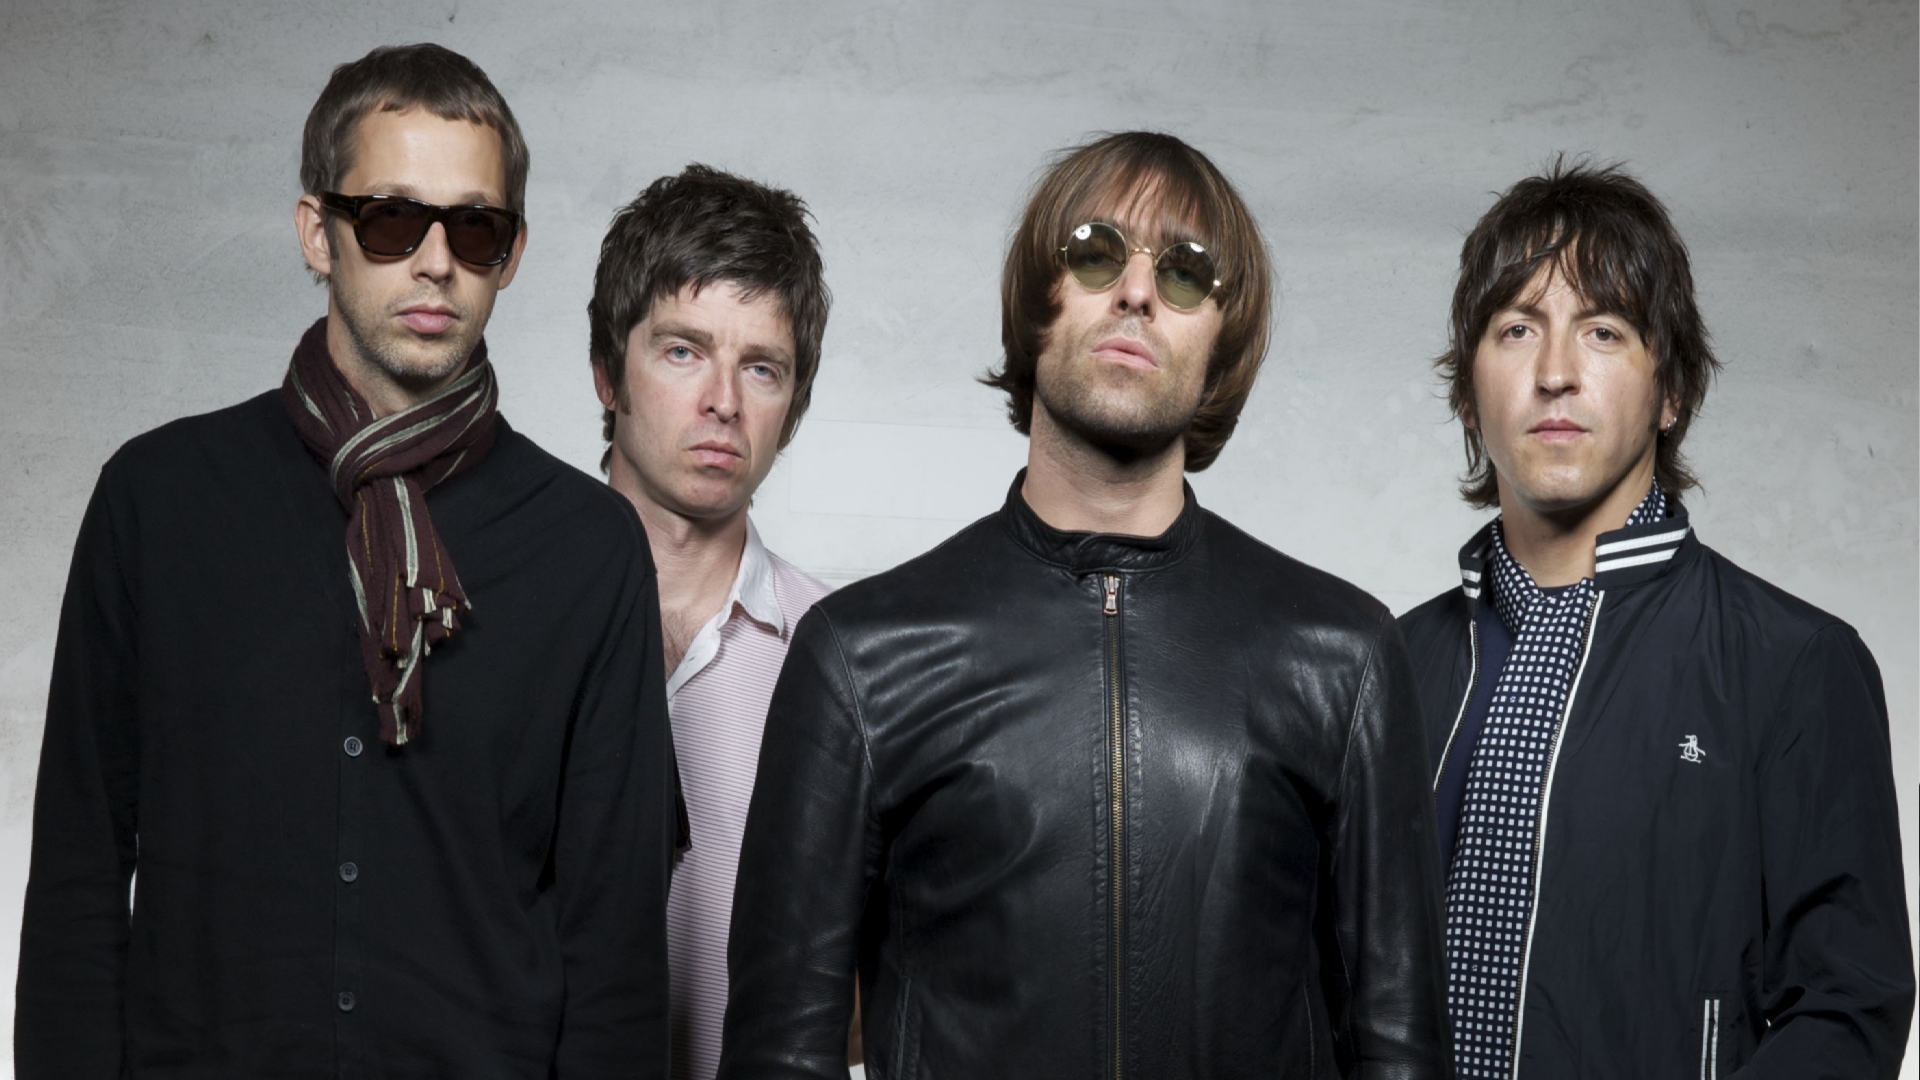 Oasis Band Wallpapers  Top Free Oasis Band Backgrounds  WallpaperAccess